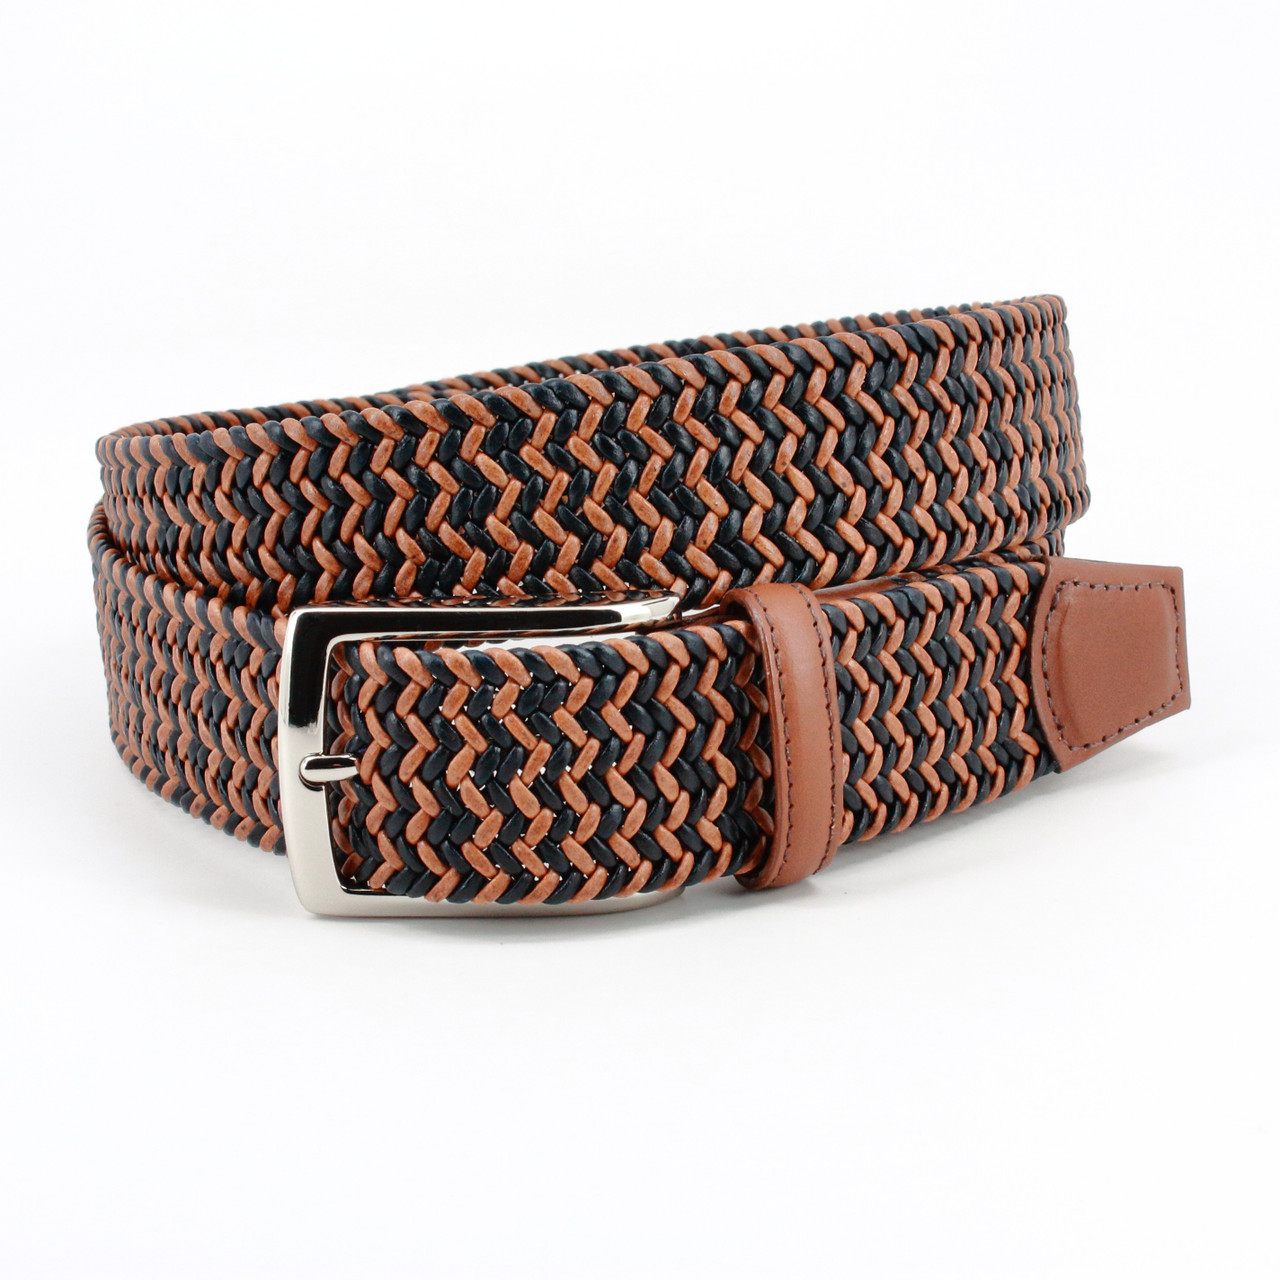 Italian Braided Leather Cording Casual Belt in Tan & Navy